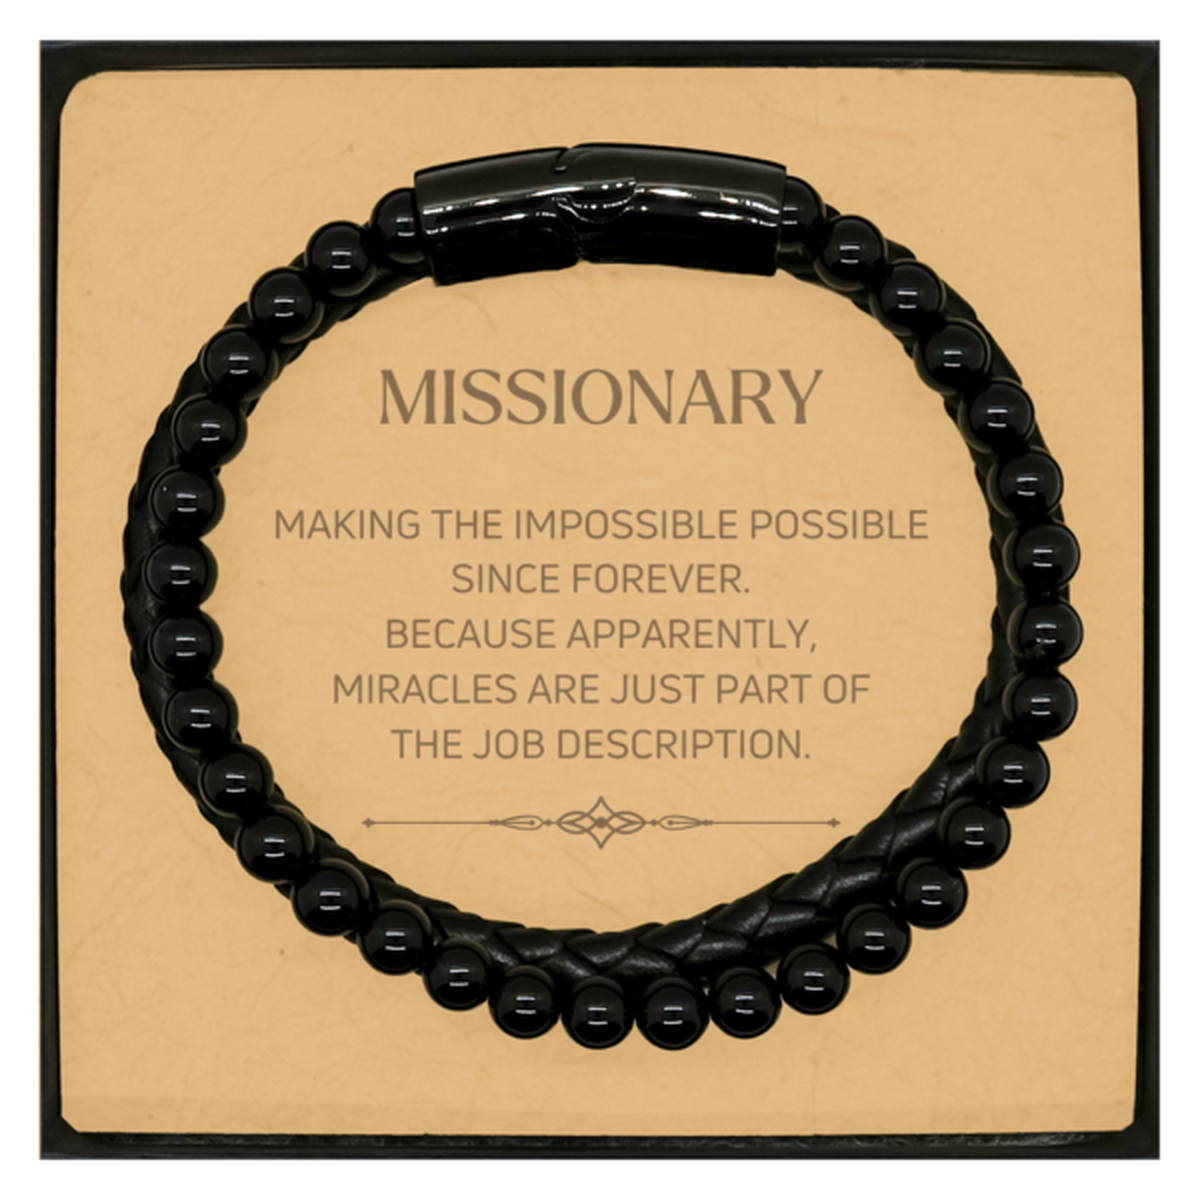 Funny Missionary Gifts, Miracles are just part of the job description, Inspirational Birthday Christmas Stone Leather Bracelets For Missionary, Men, Women, Coworkers, Friends, Boss